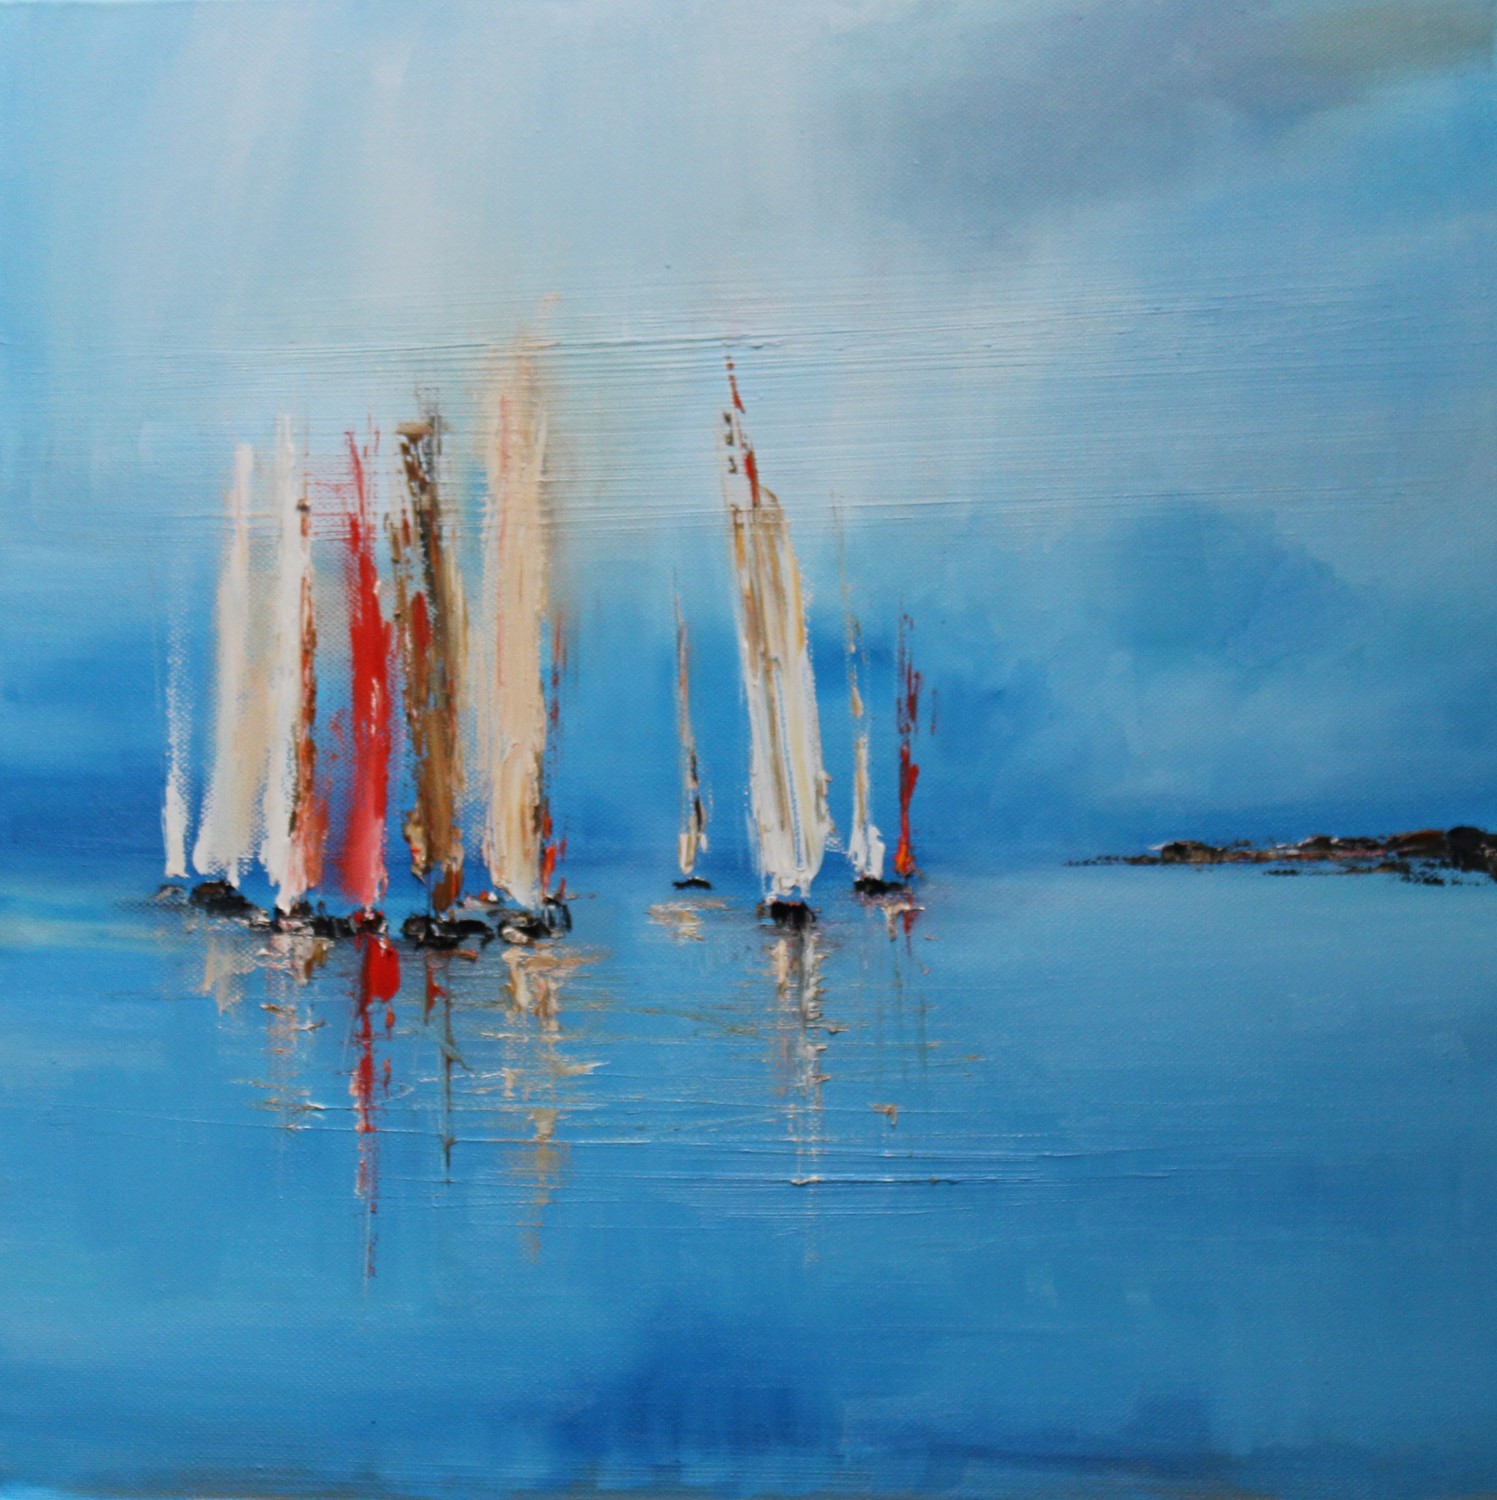 'Reflections on a Summers Day' by artist Rosanne Barr